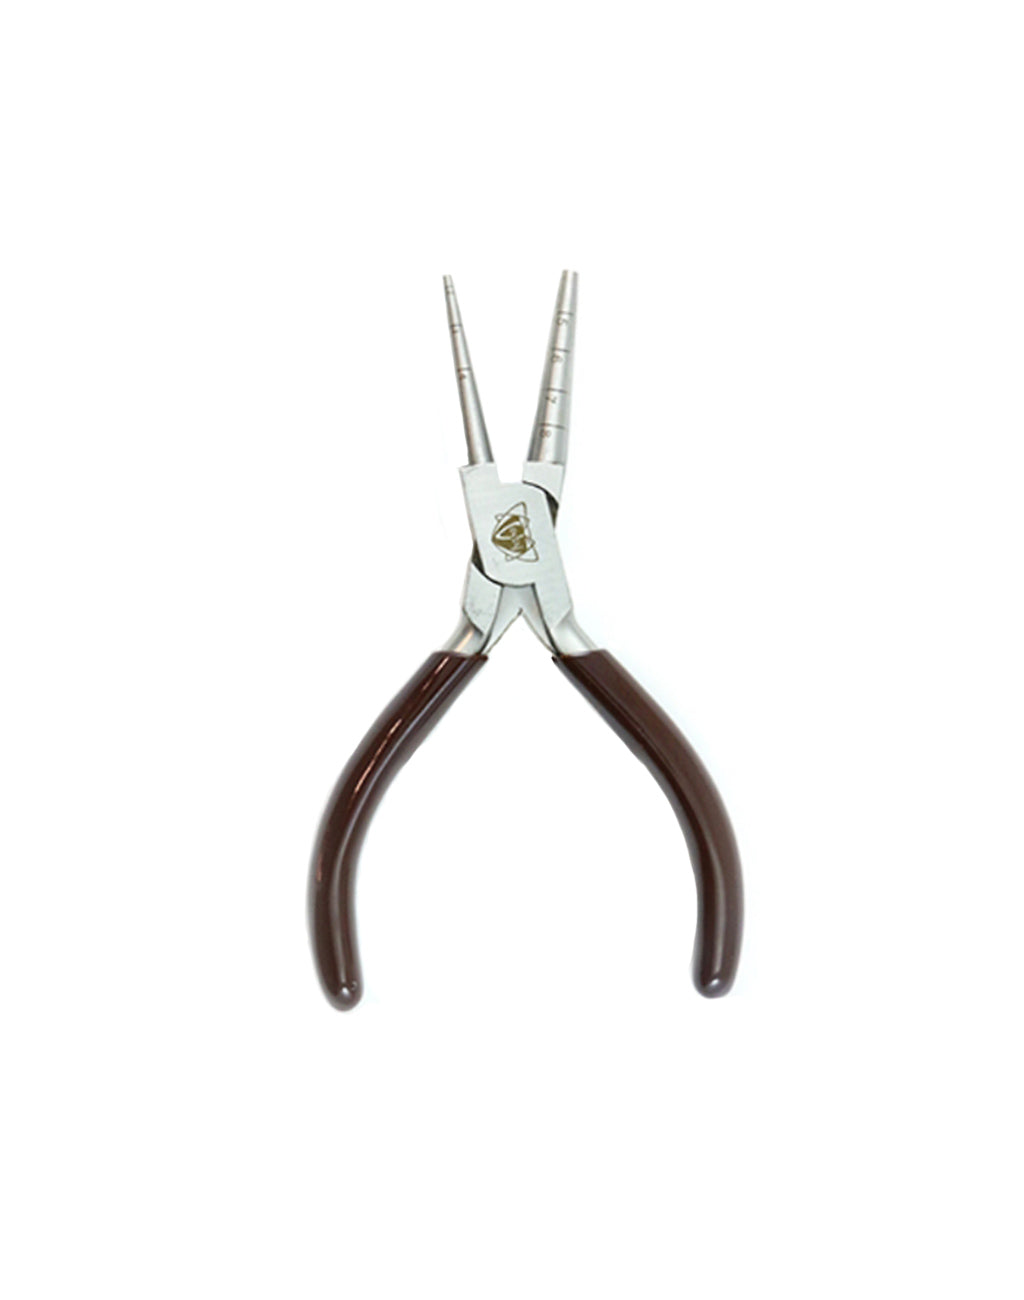 Wholesale Iron Jewelry Tool Sets: Round Nose Pliers 